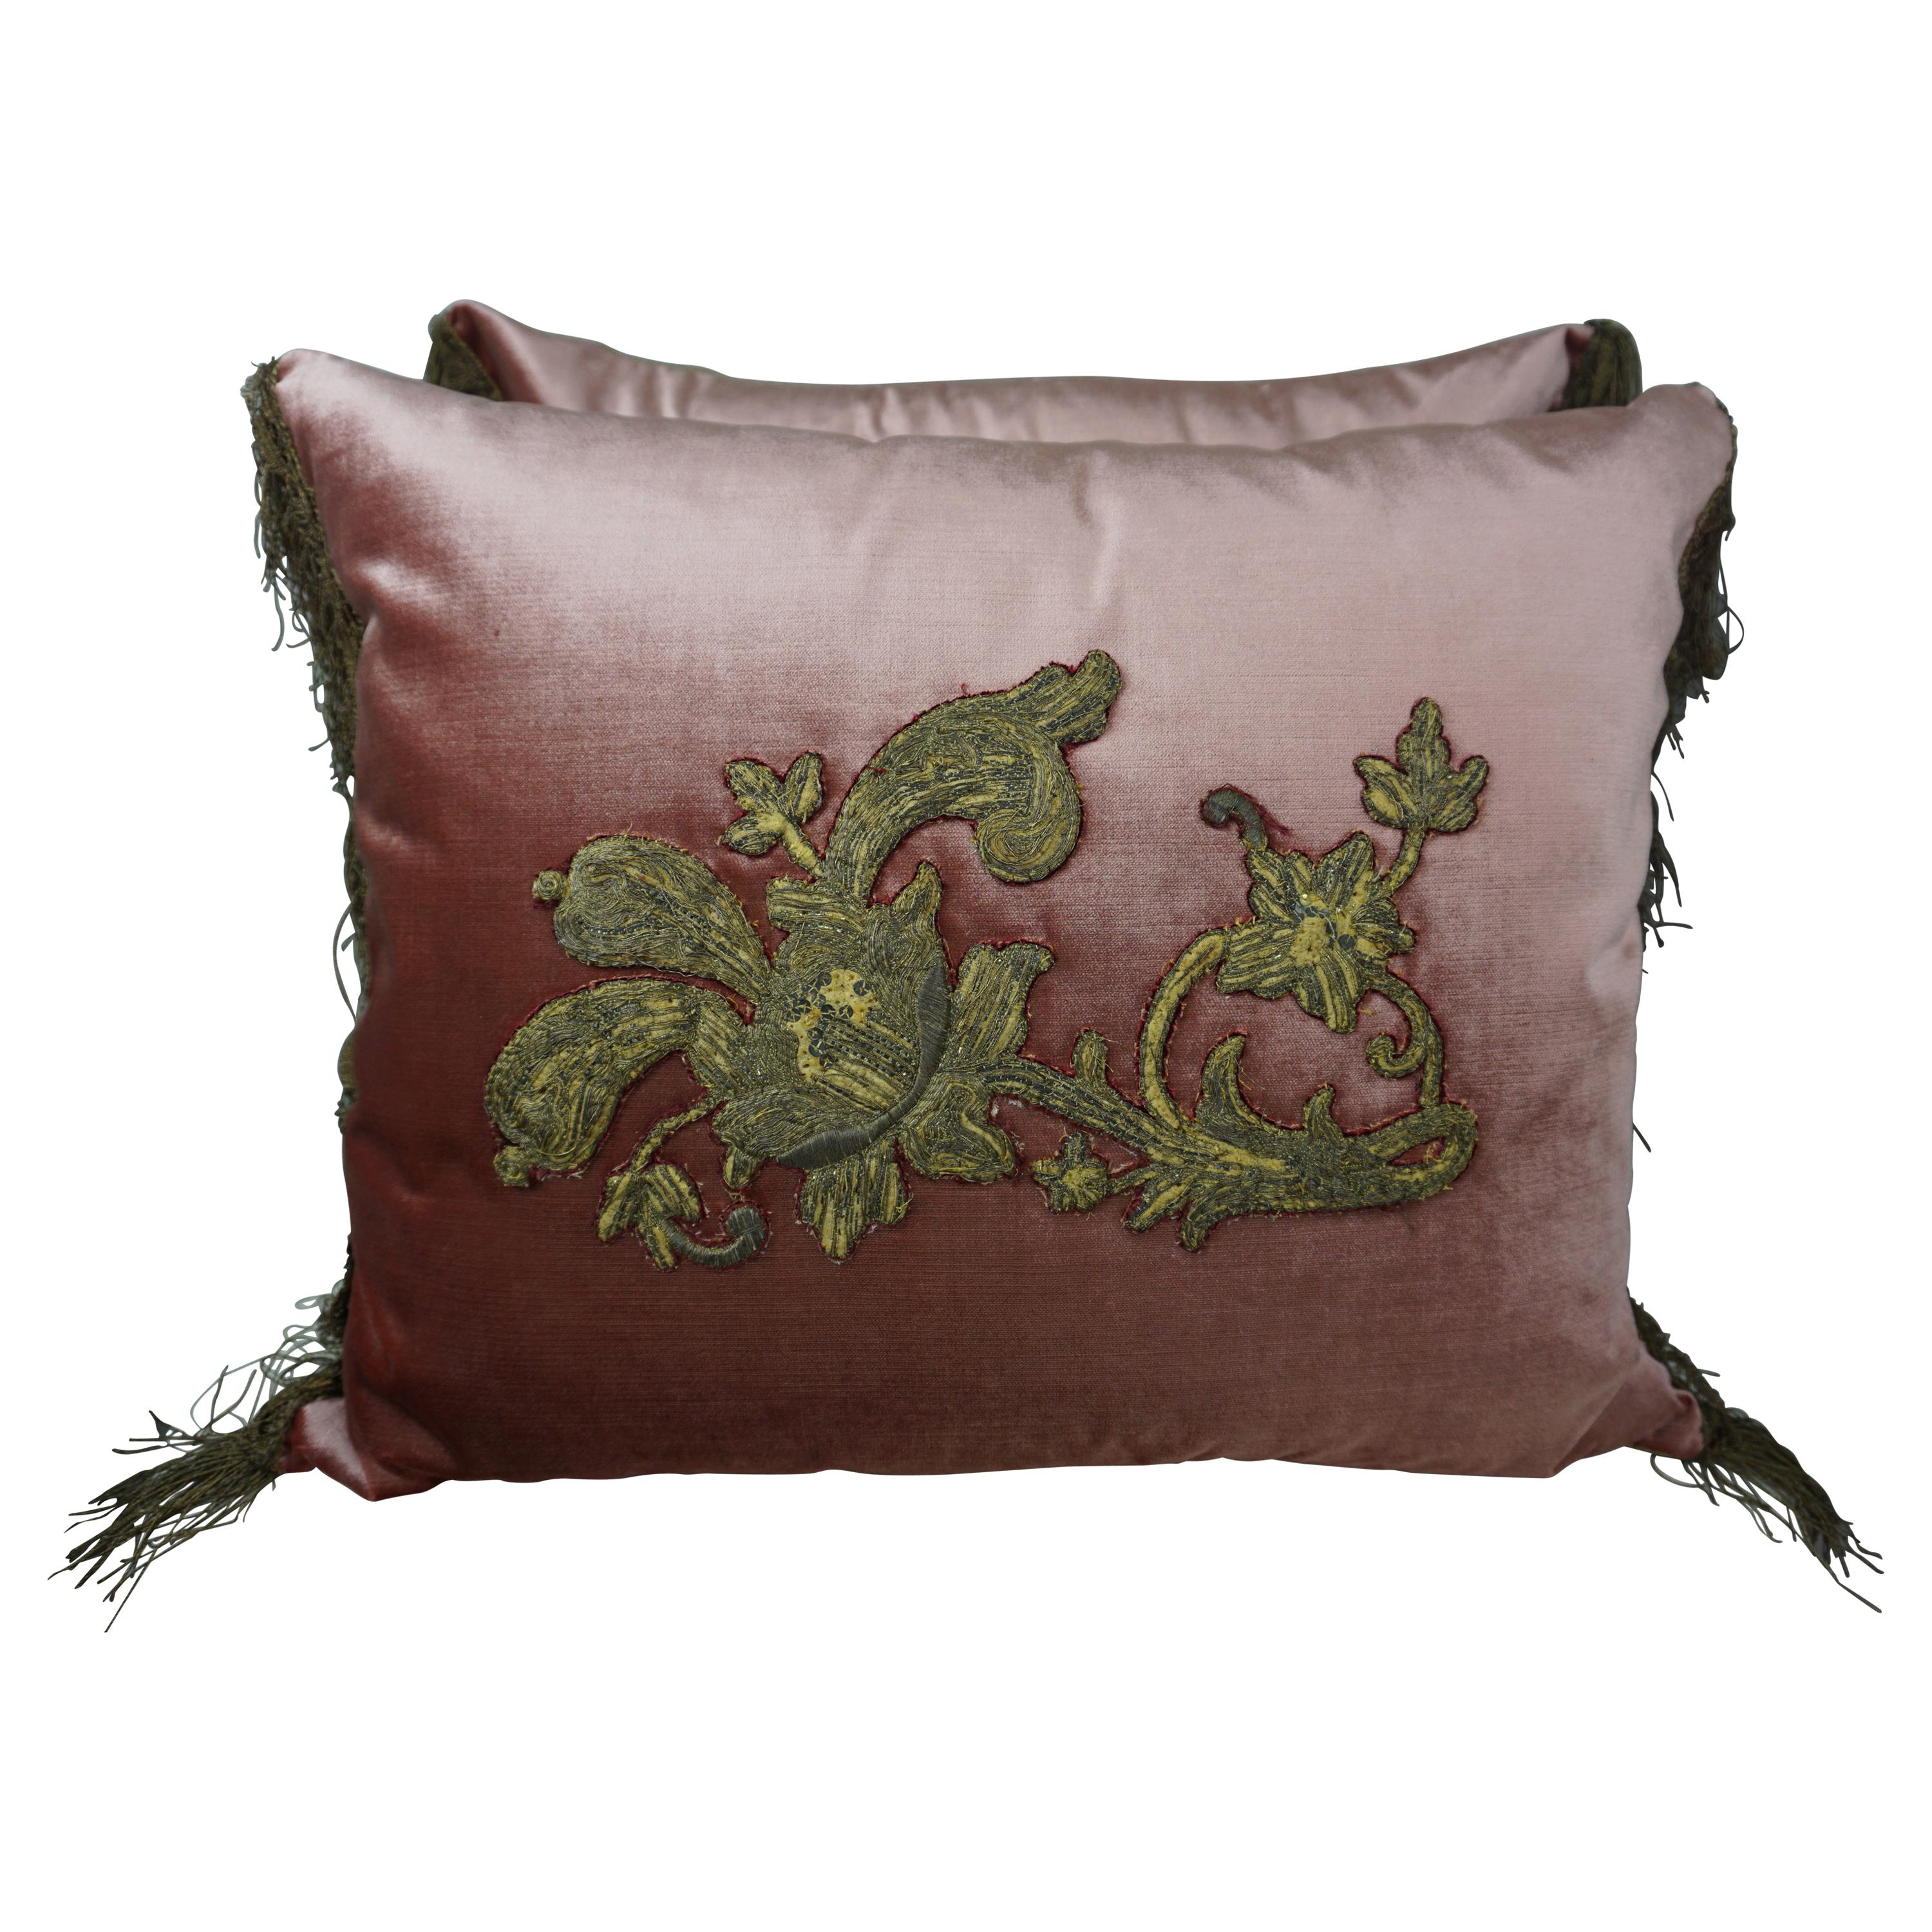 Pair of Pink Velvet Pillows with 18th Century Metallic Appliques